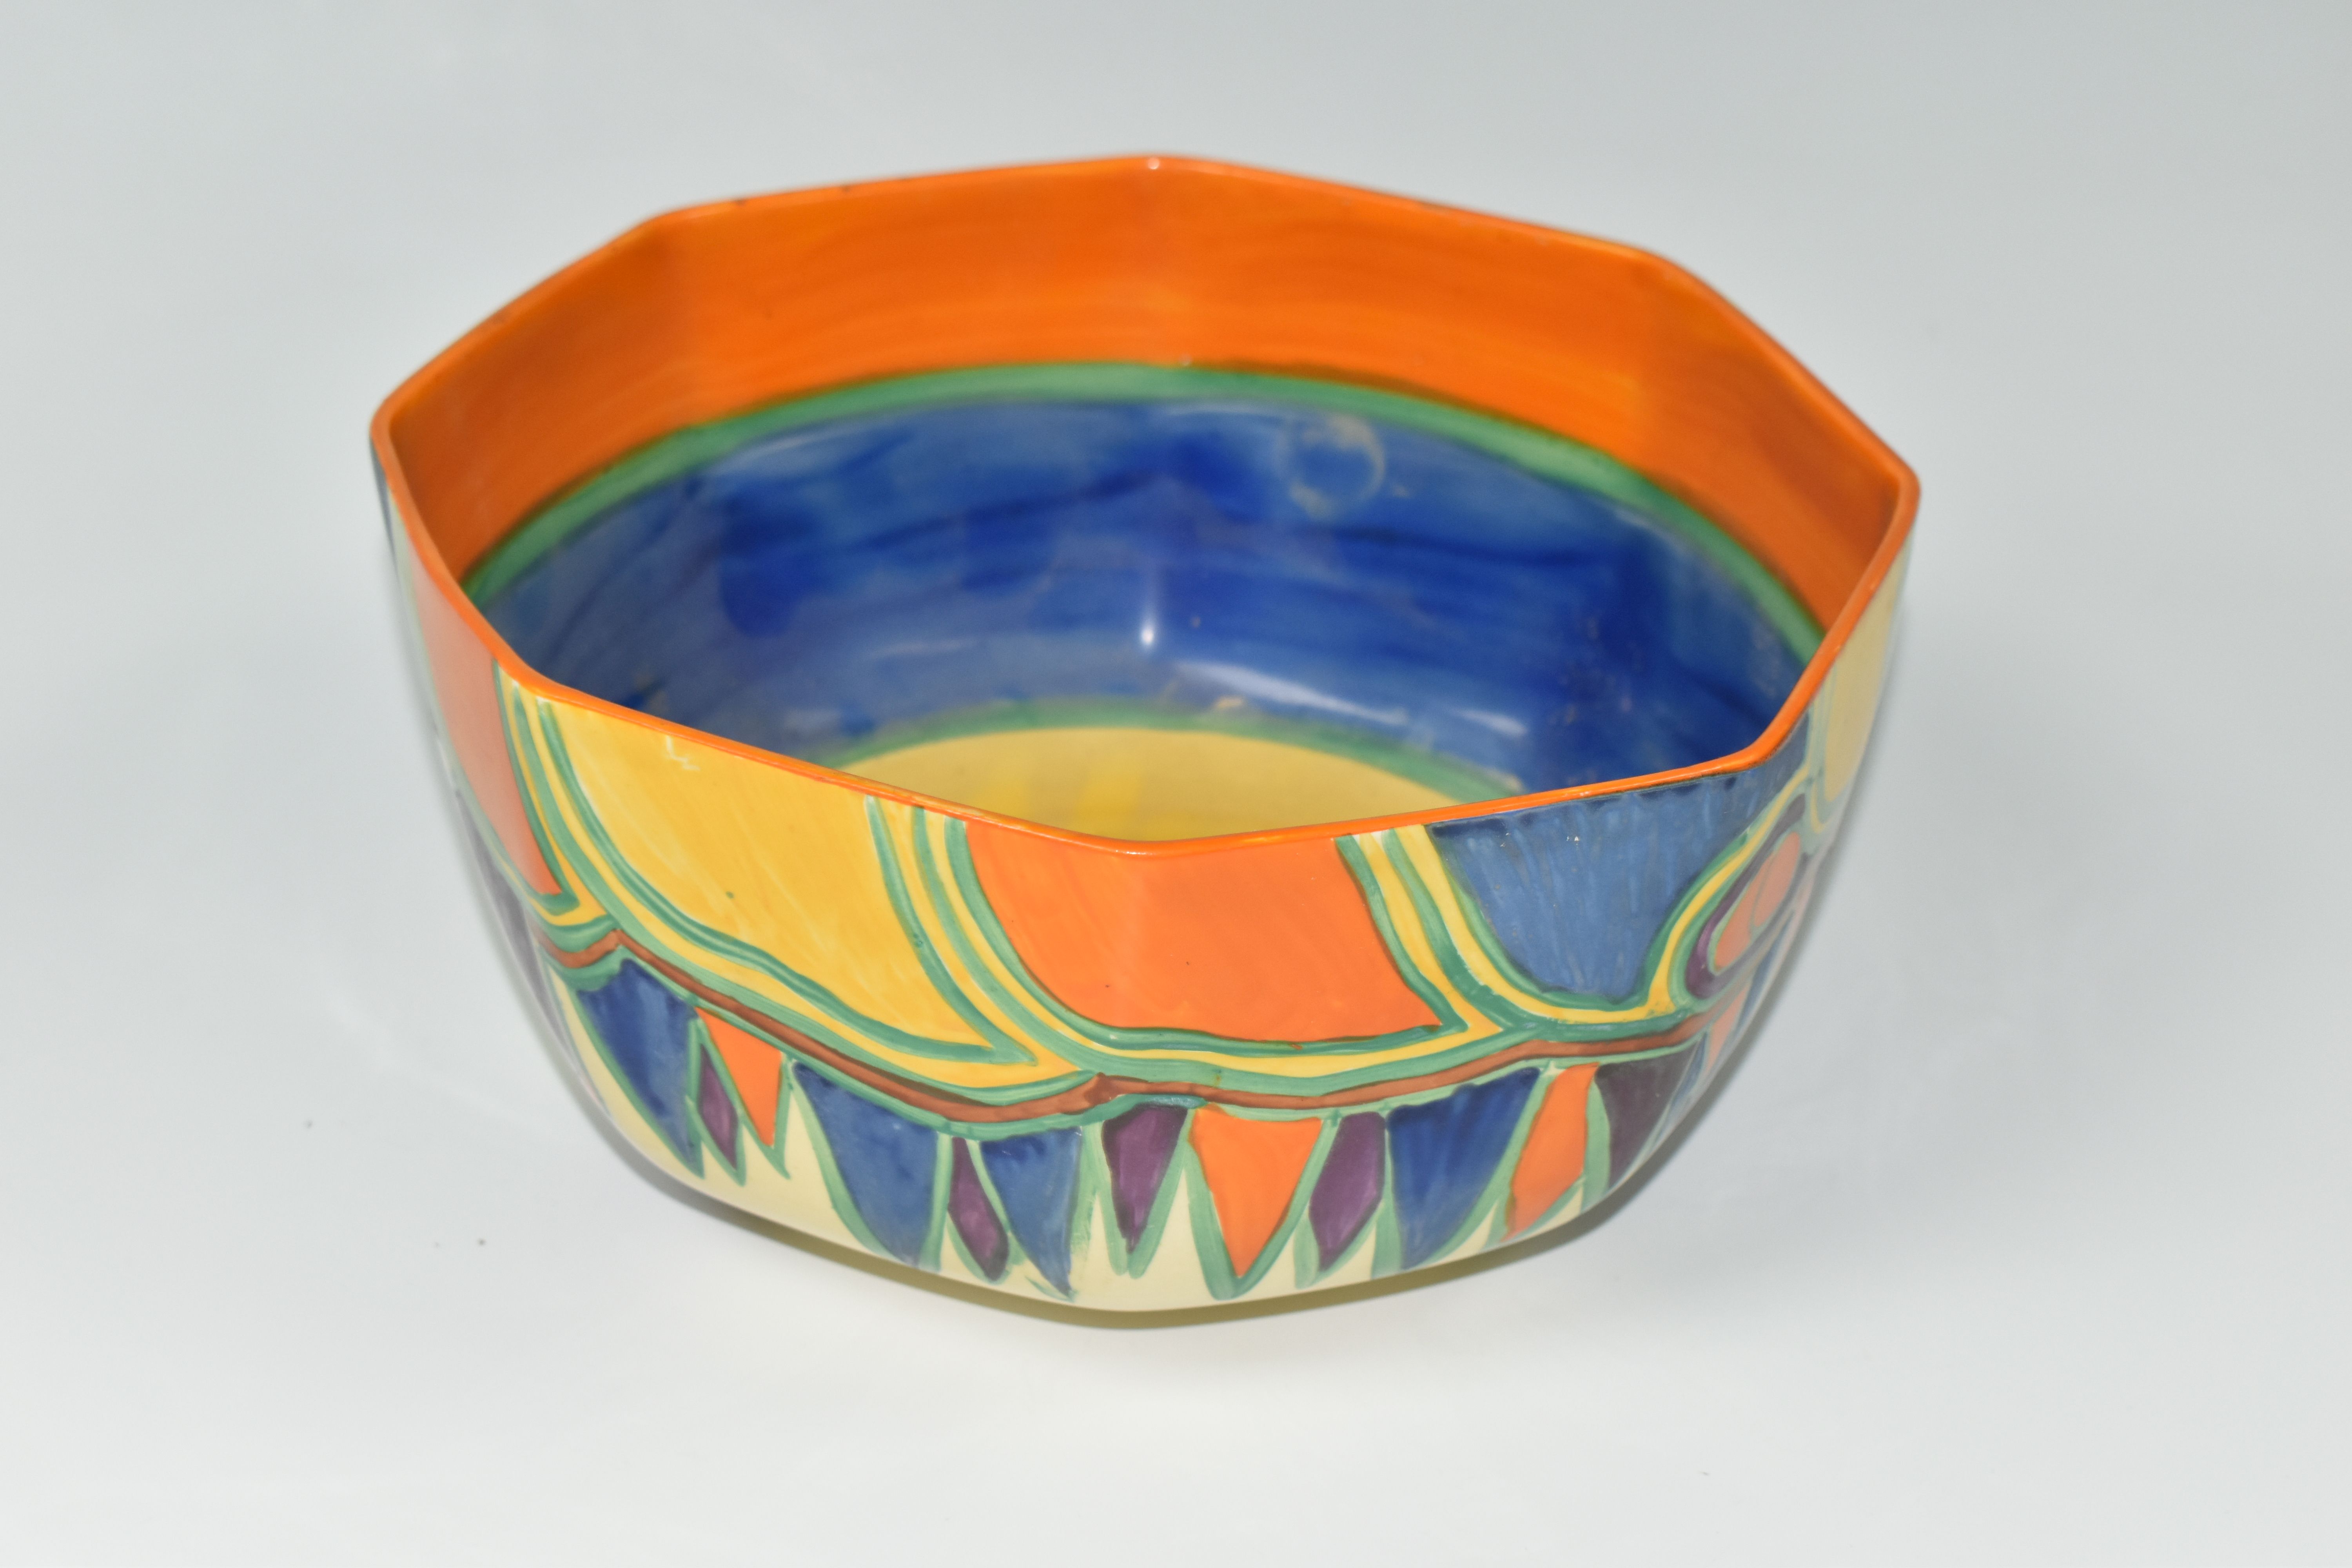 A CLARICE CLIFF BIZARRE KANDINA OCTAGONAL BOWL, the interior painted with bands of orange, green, - Image 2 of 7